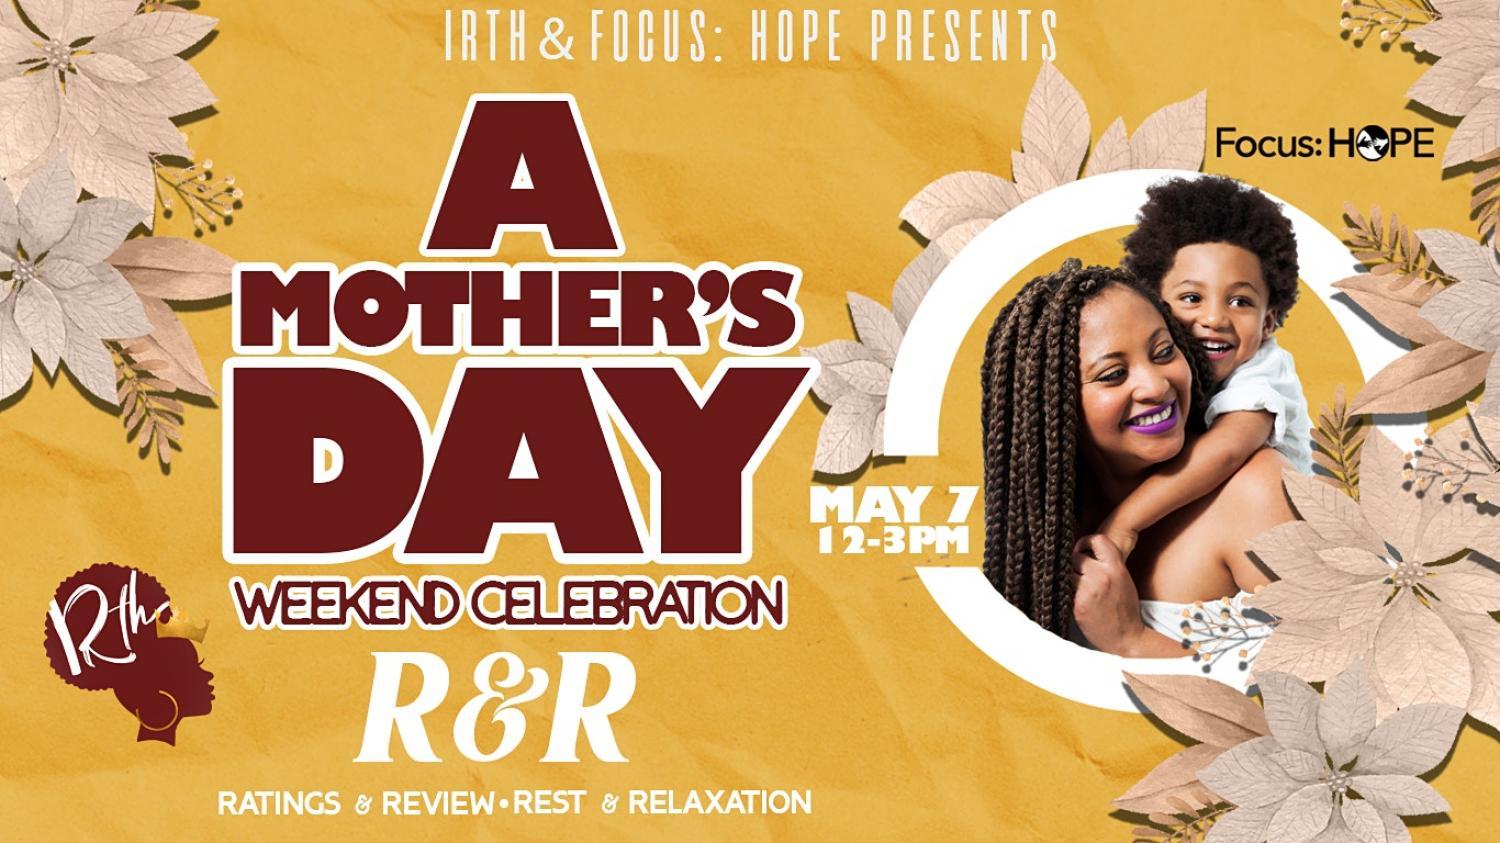 Mother's Day Weekend Detroit: IRTH App's